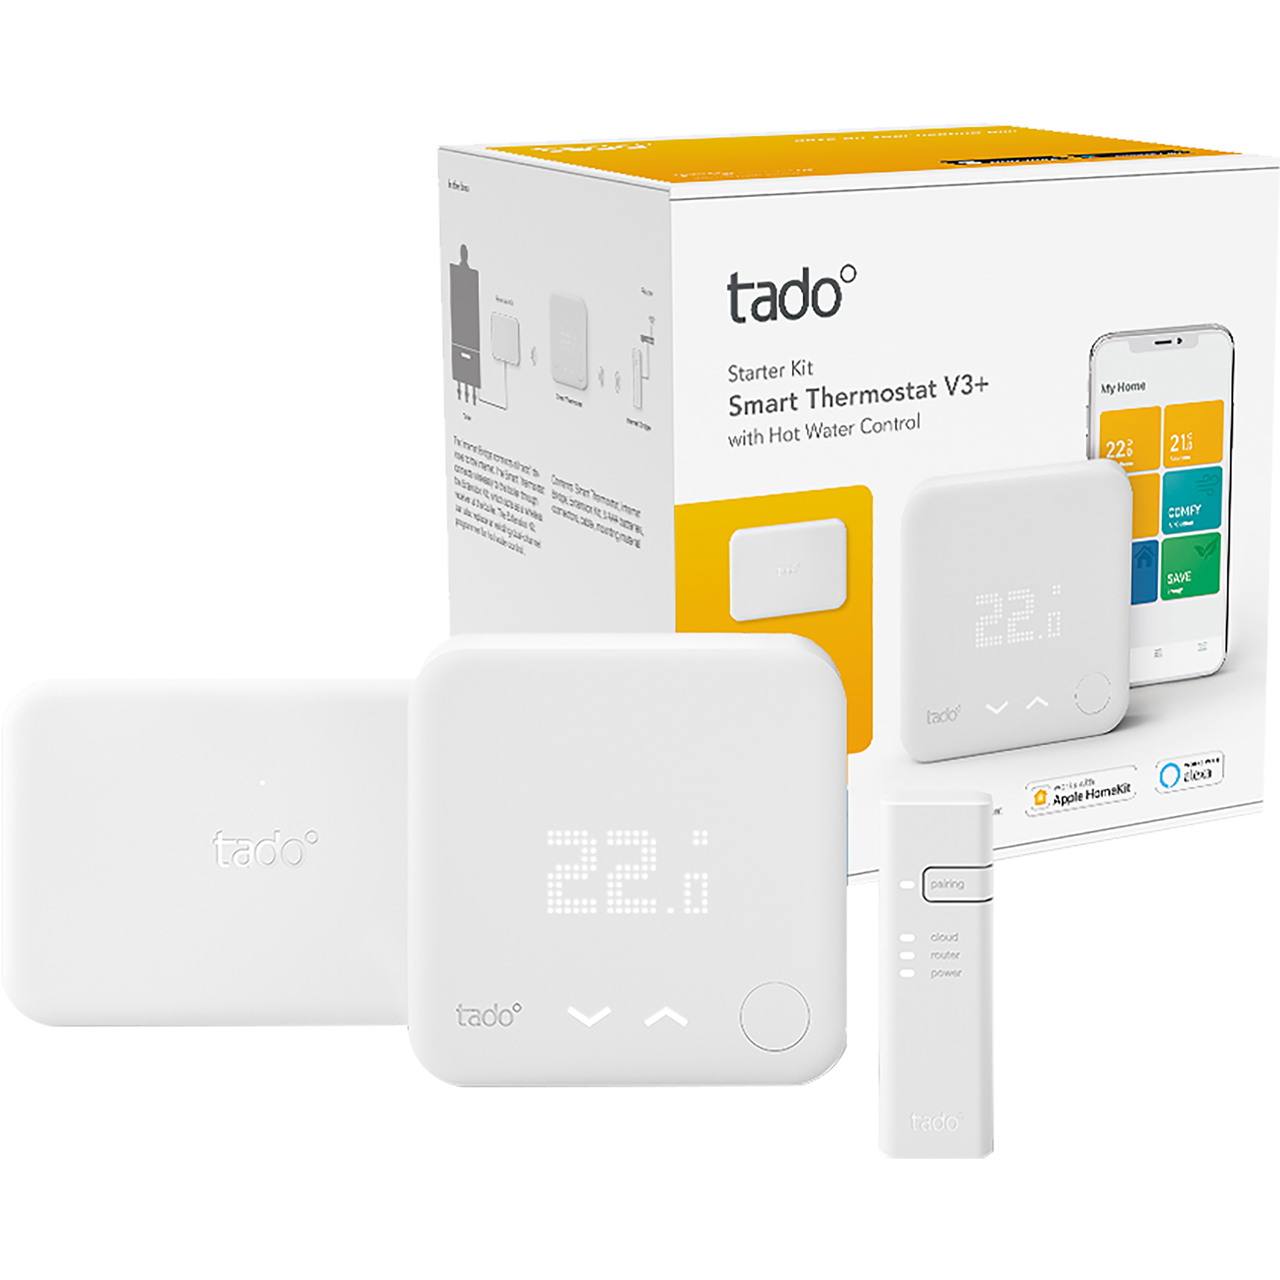 tado Smart Thermostat Starter Kit V3+ with Hot Water Control Review